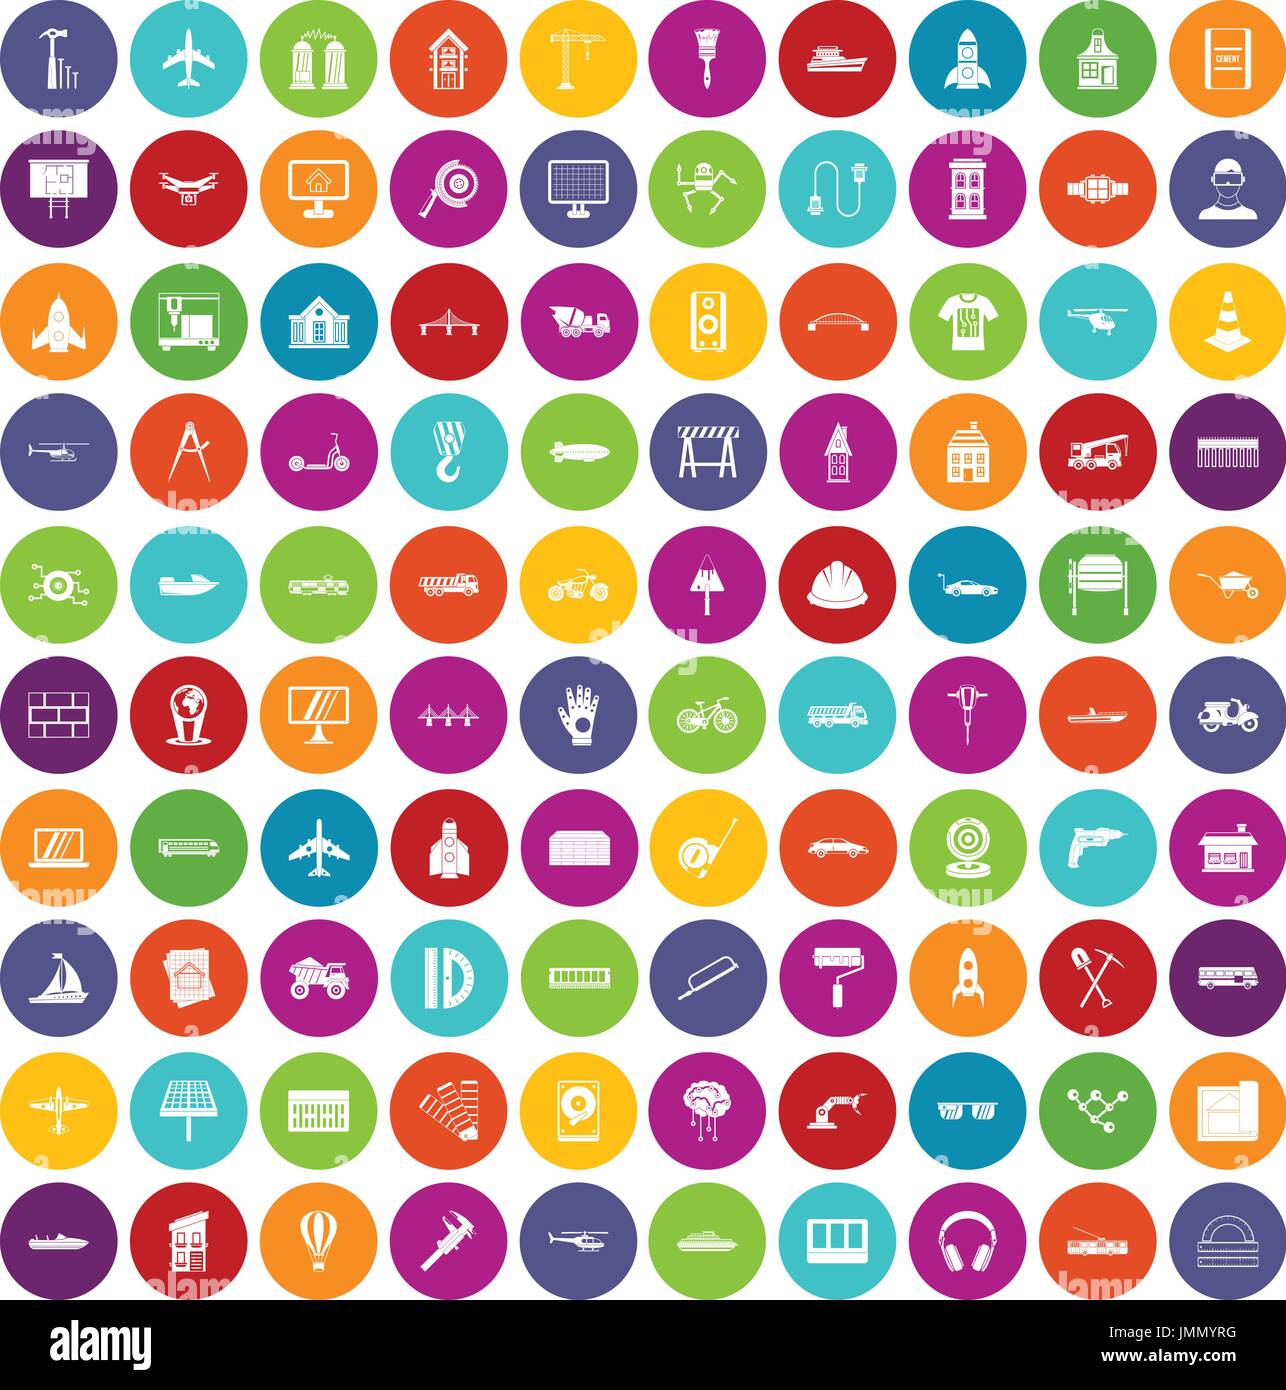 100 engineering icons set color Stock Vector